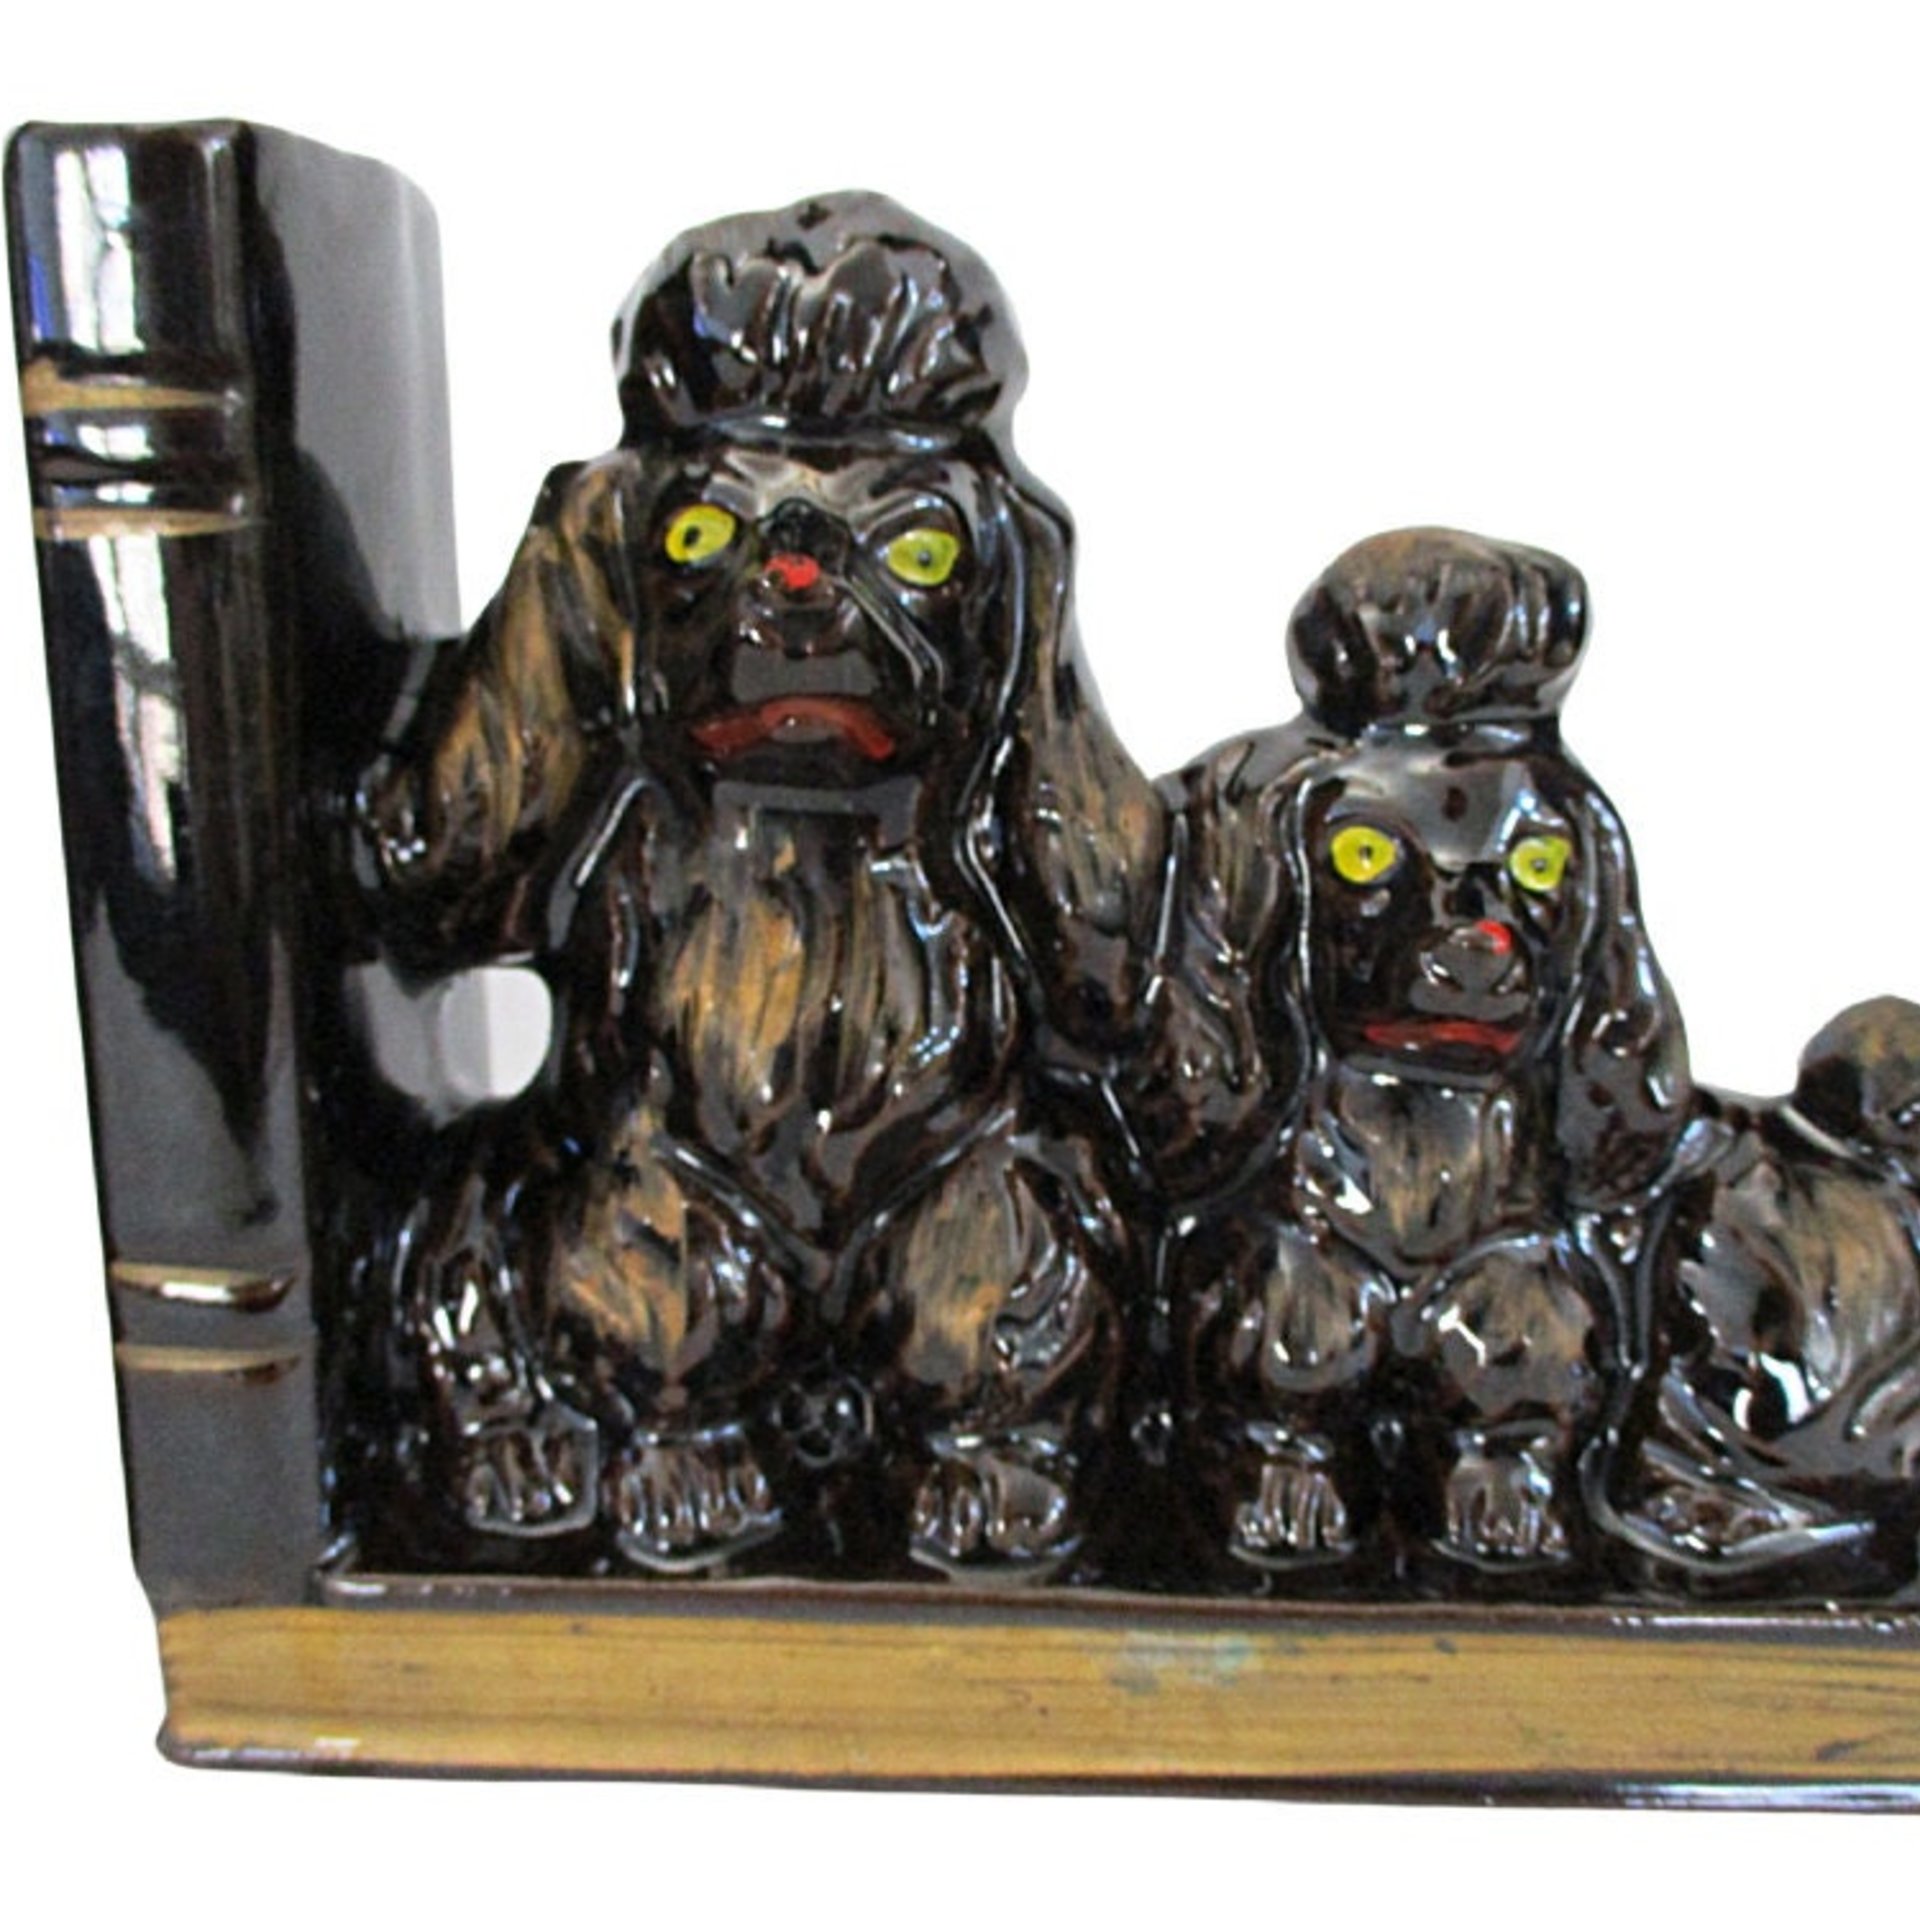 Mid Century Poodle Bookends, Pair of Black French Poodles, Japan Redware, Gold Accents